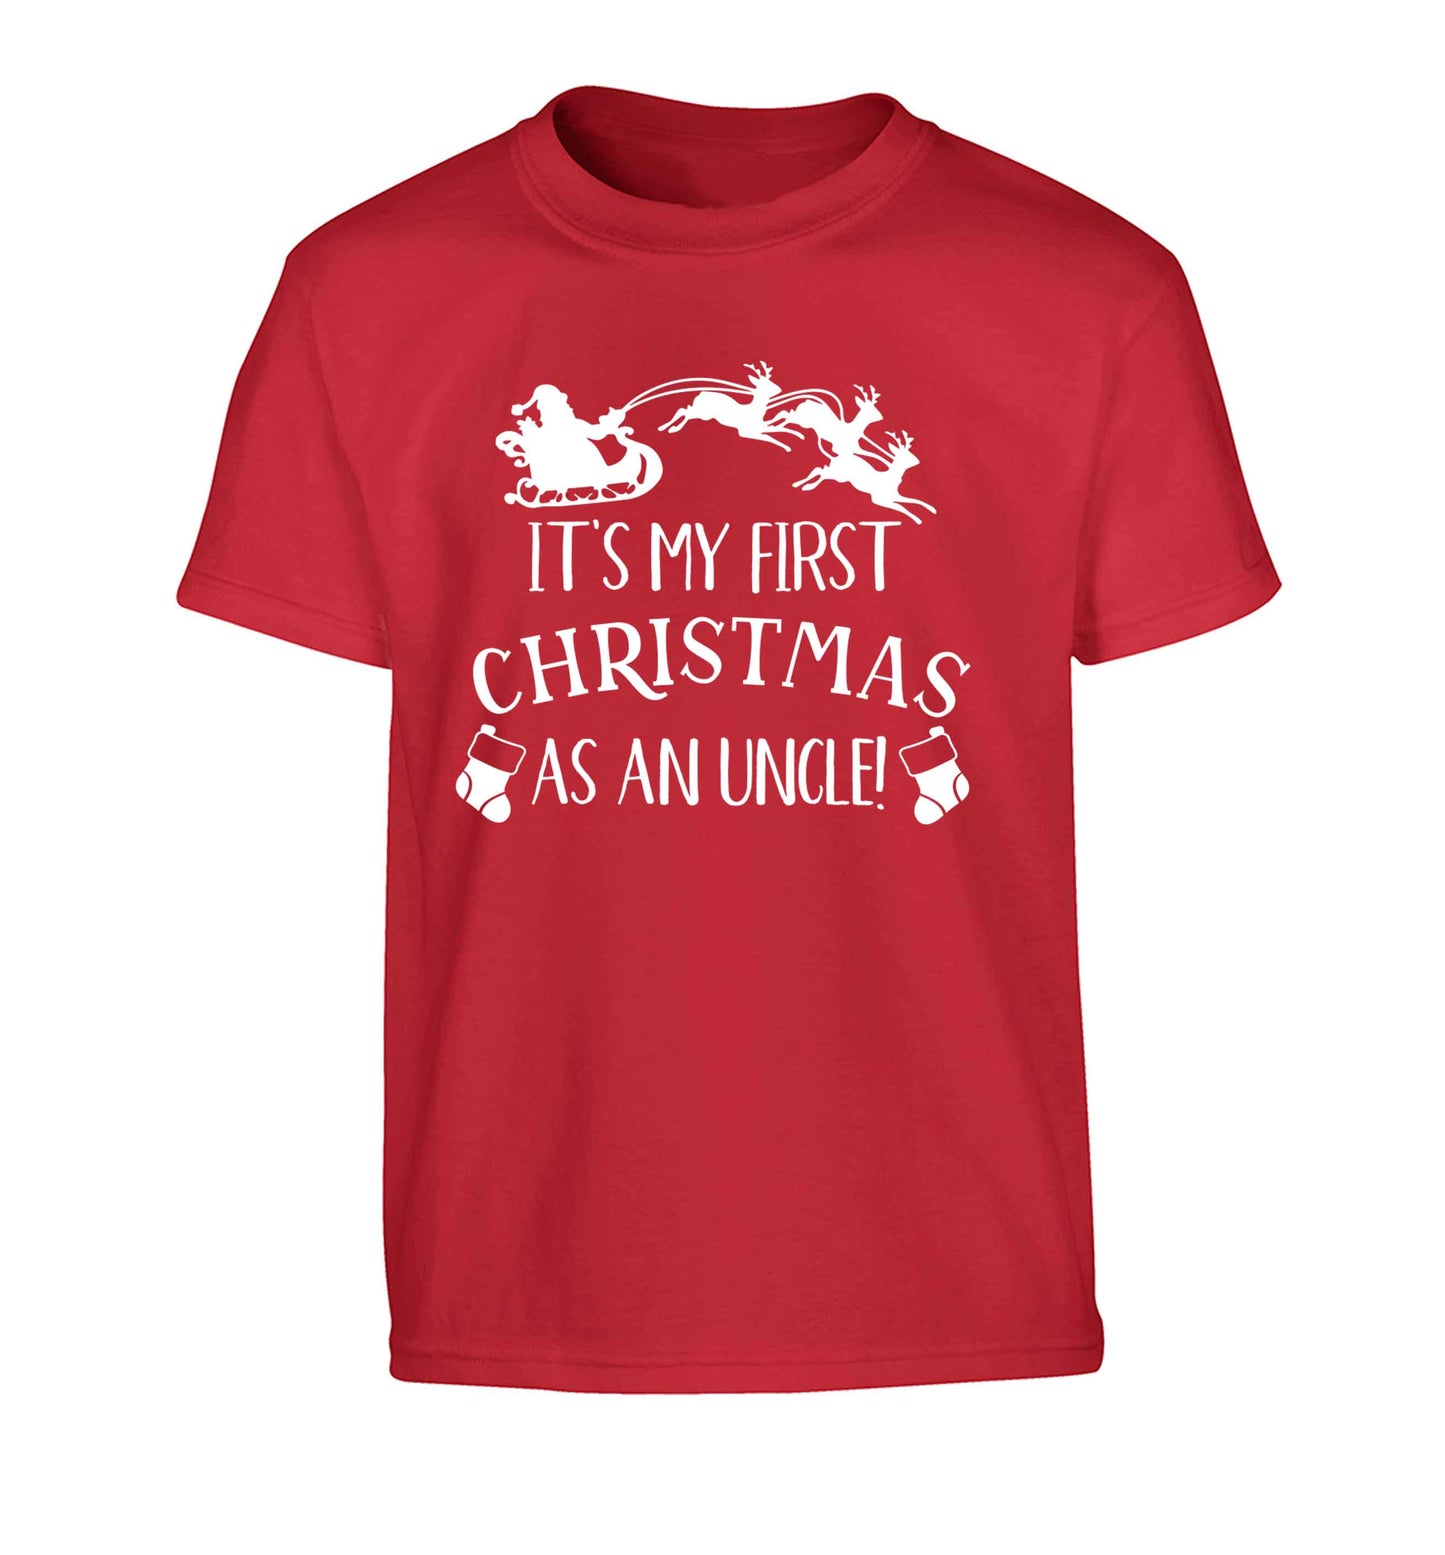 It's my first Christmas as an uncle! Children's red Tshirt 12-13 Years